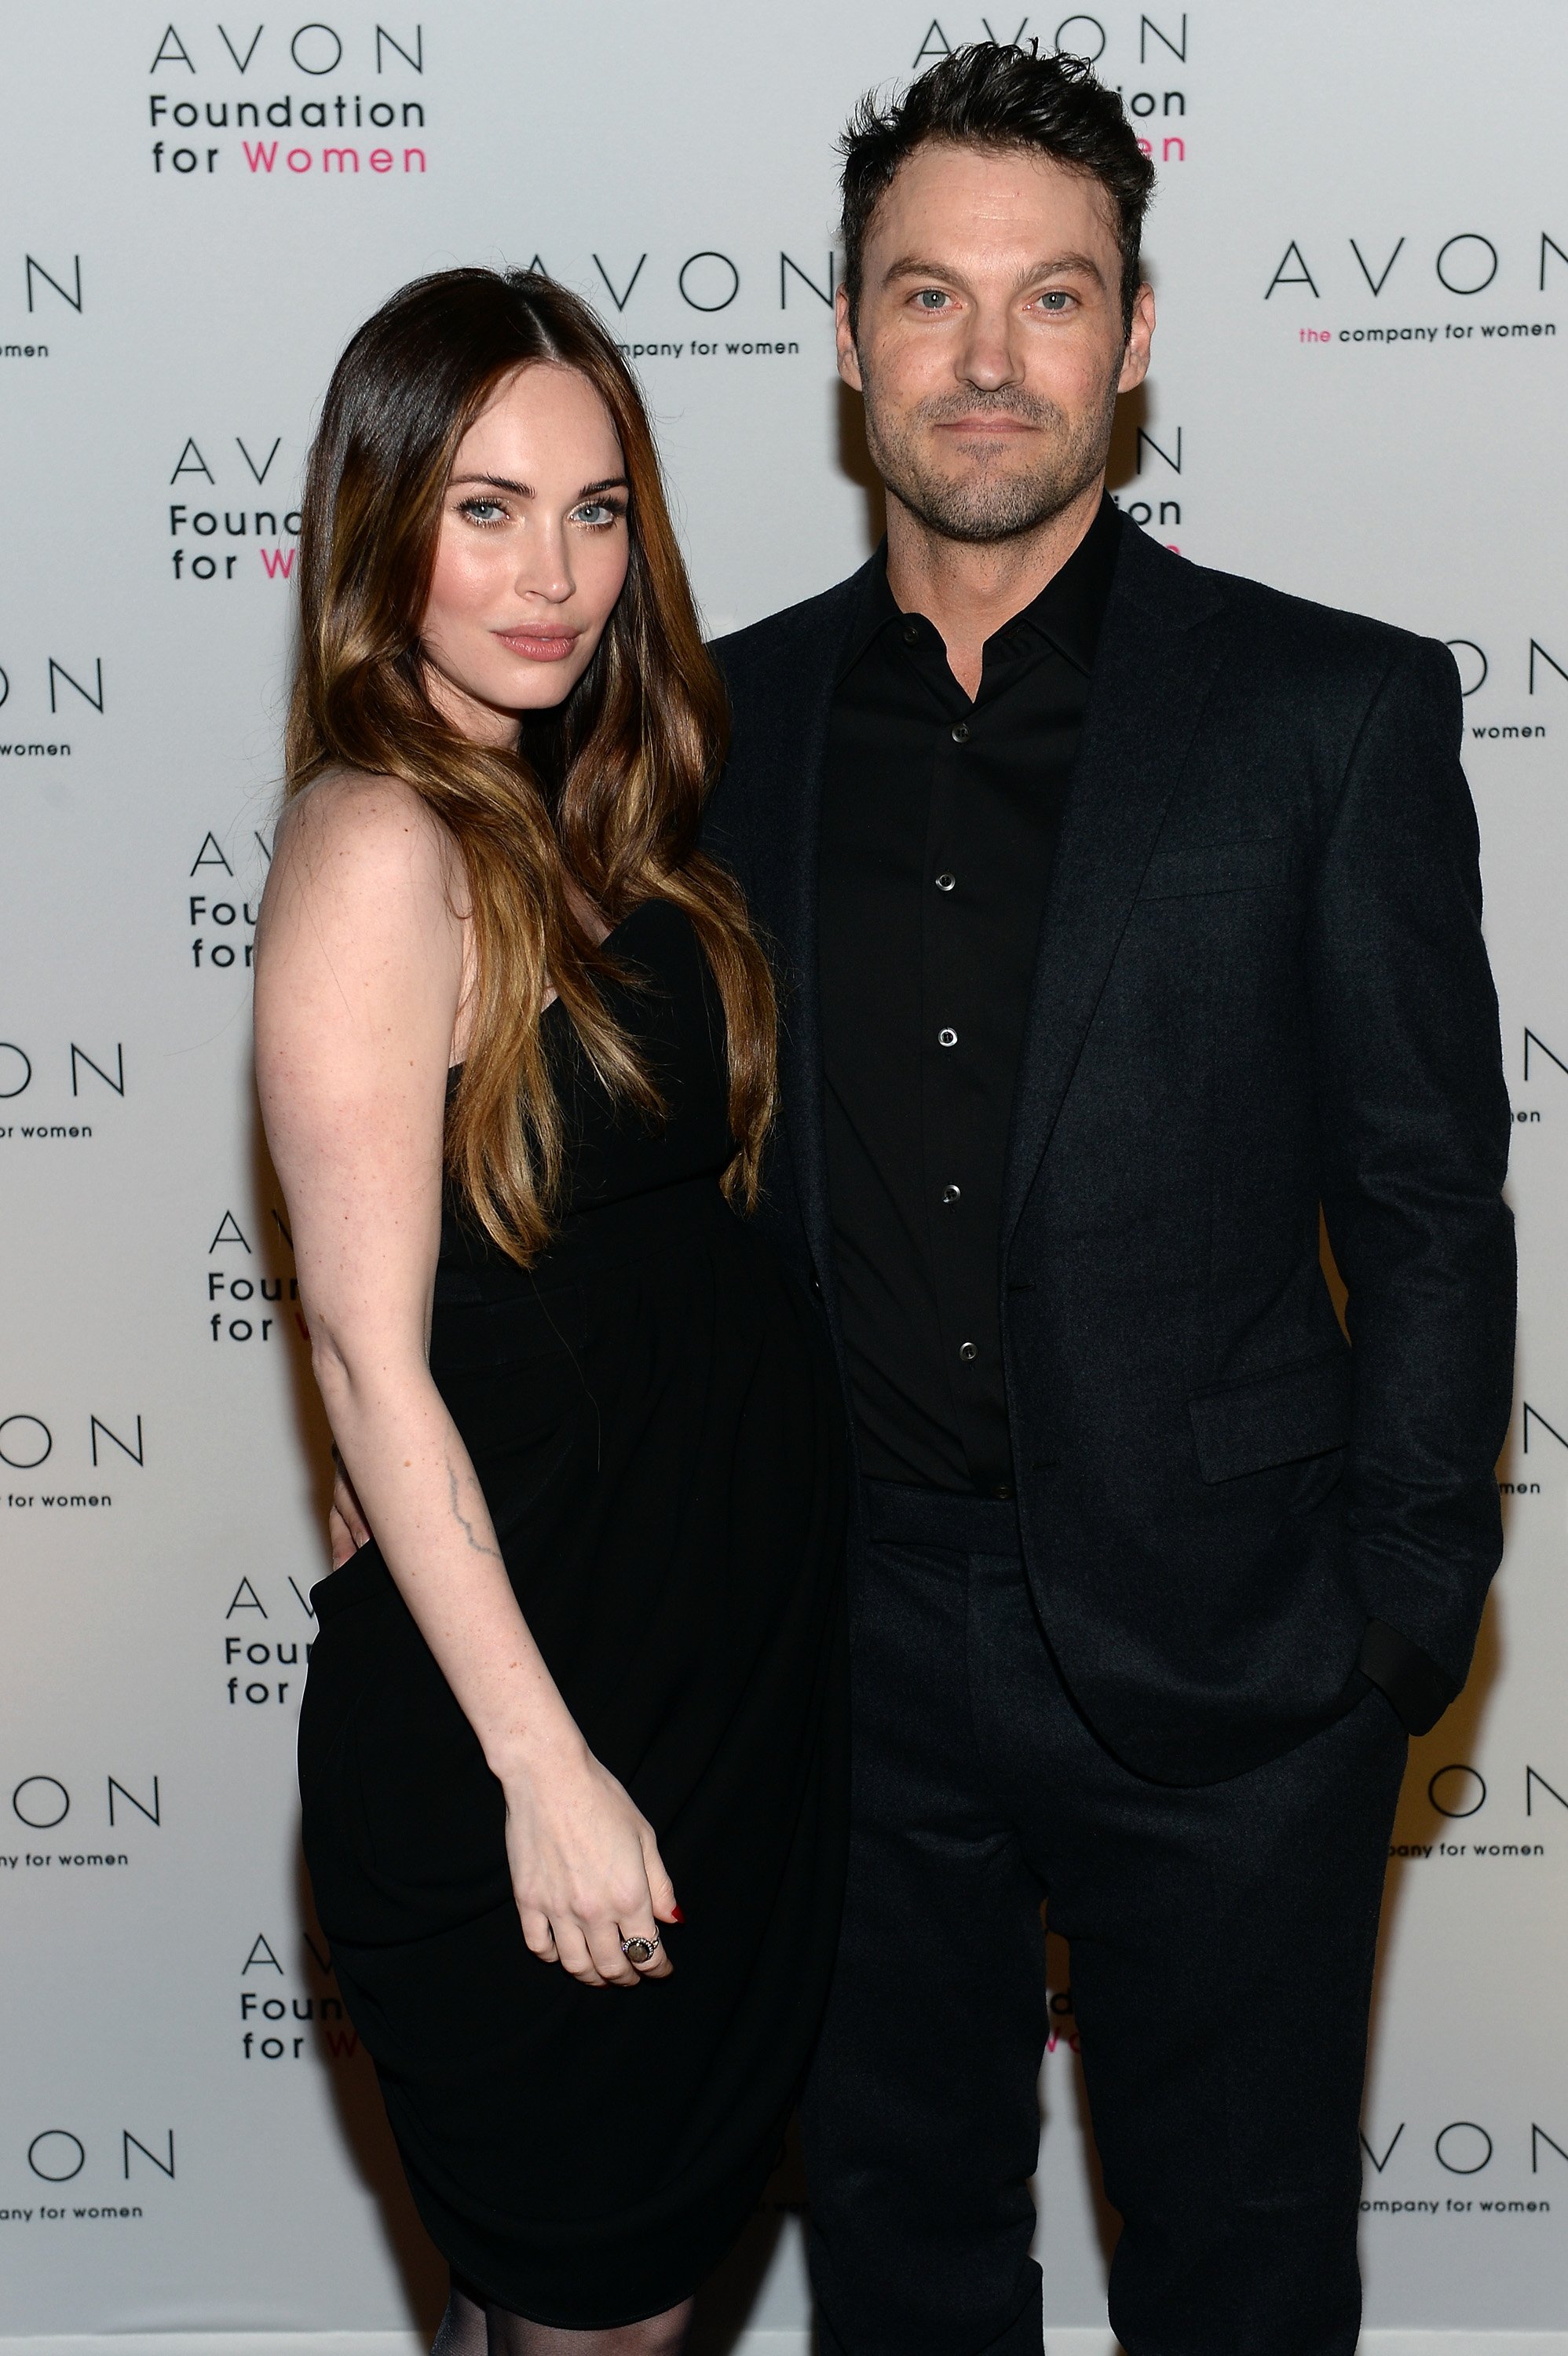 Megan Fox and Brian Austin Green in New York in 2013 | Source: Getty Images